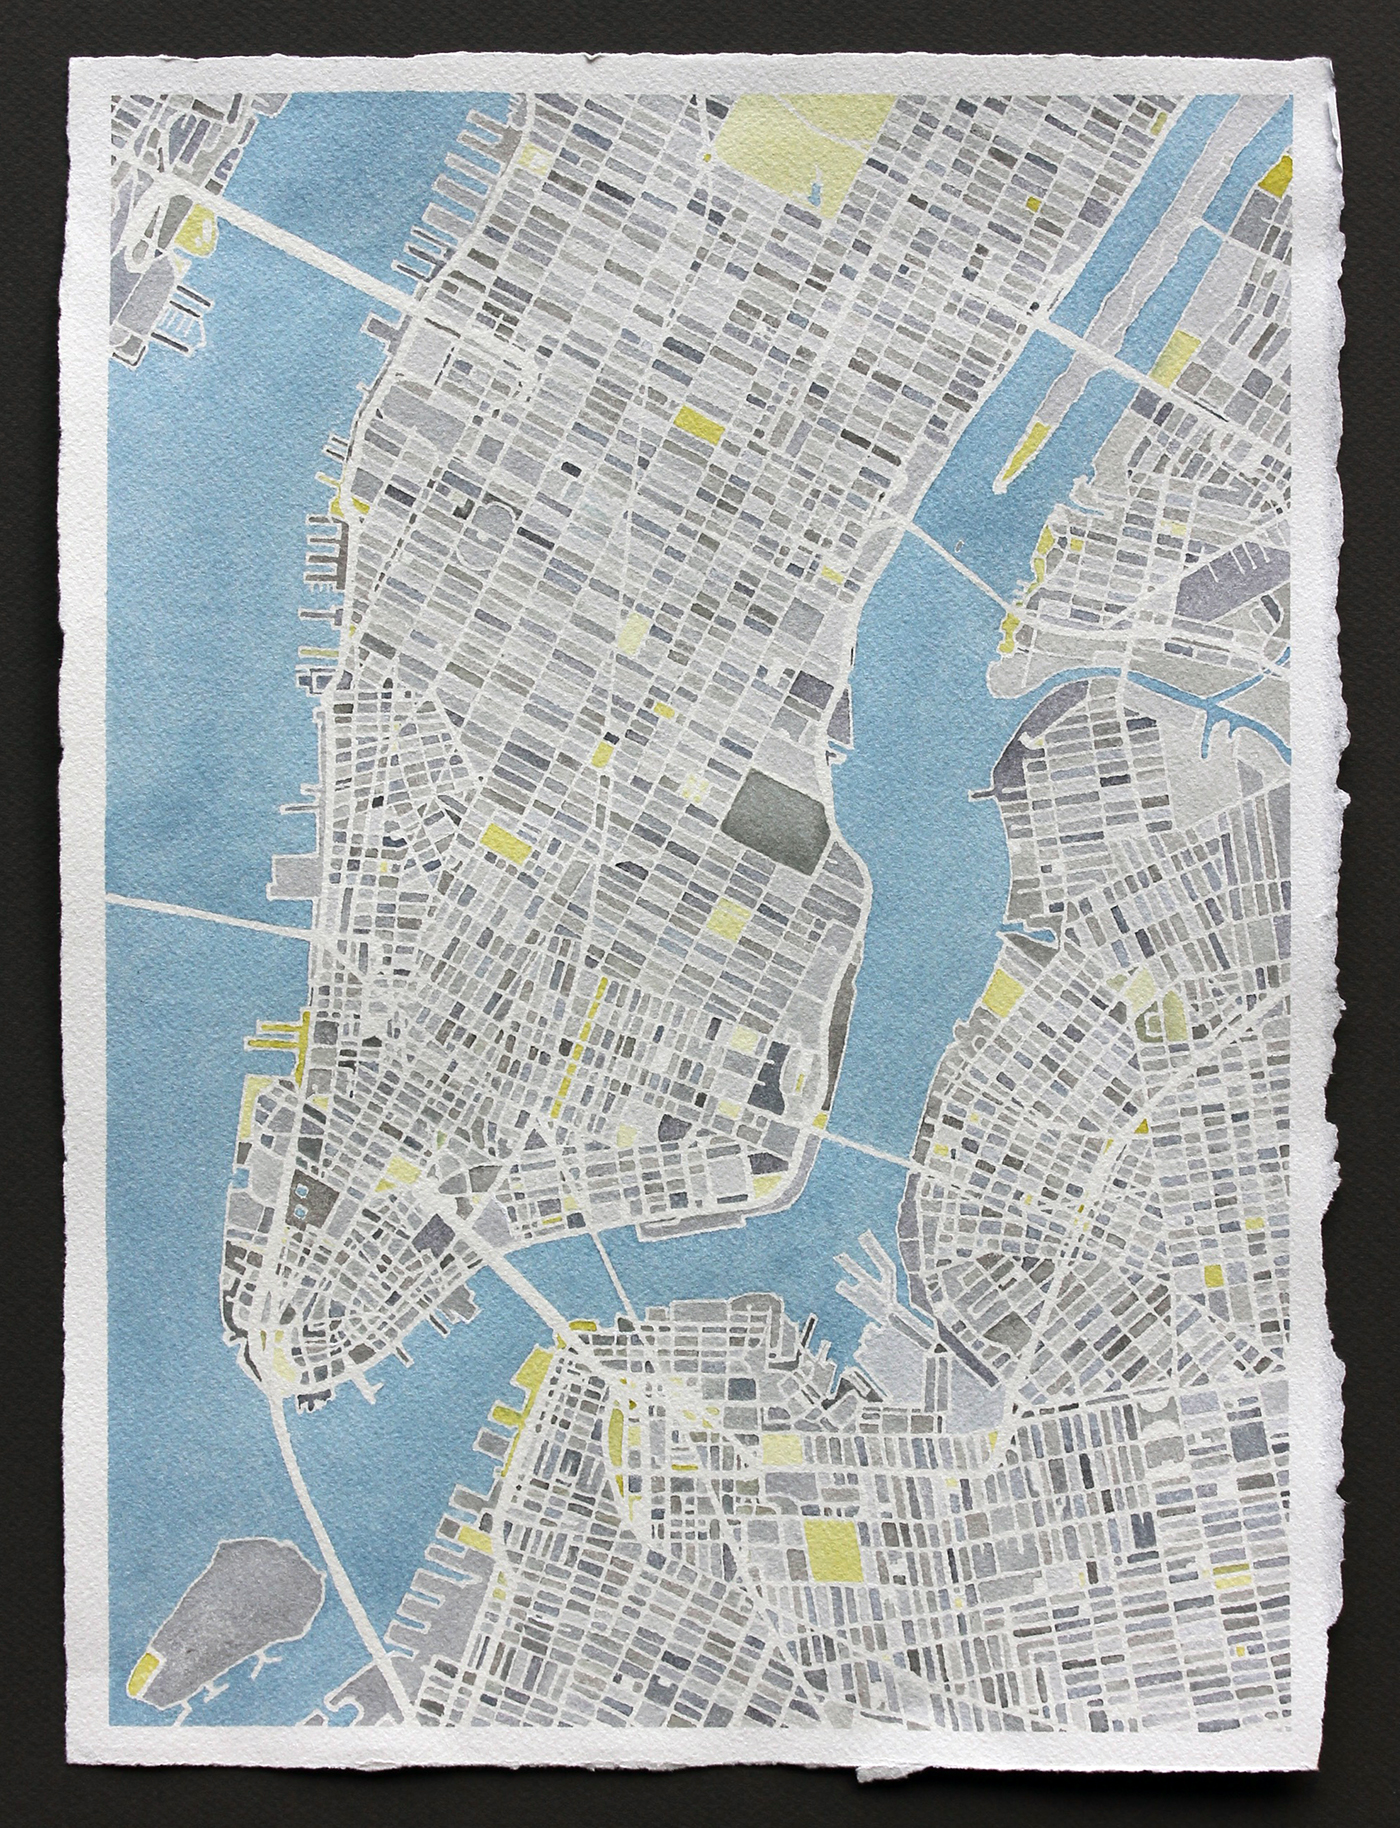 New York city watercolor map design cartography art world tourism Travel Street explore paint downtown nyc